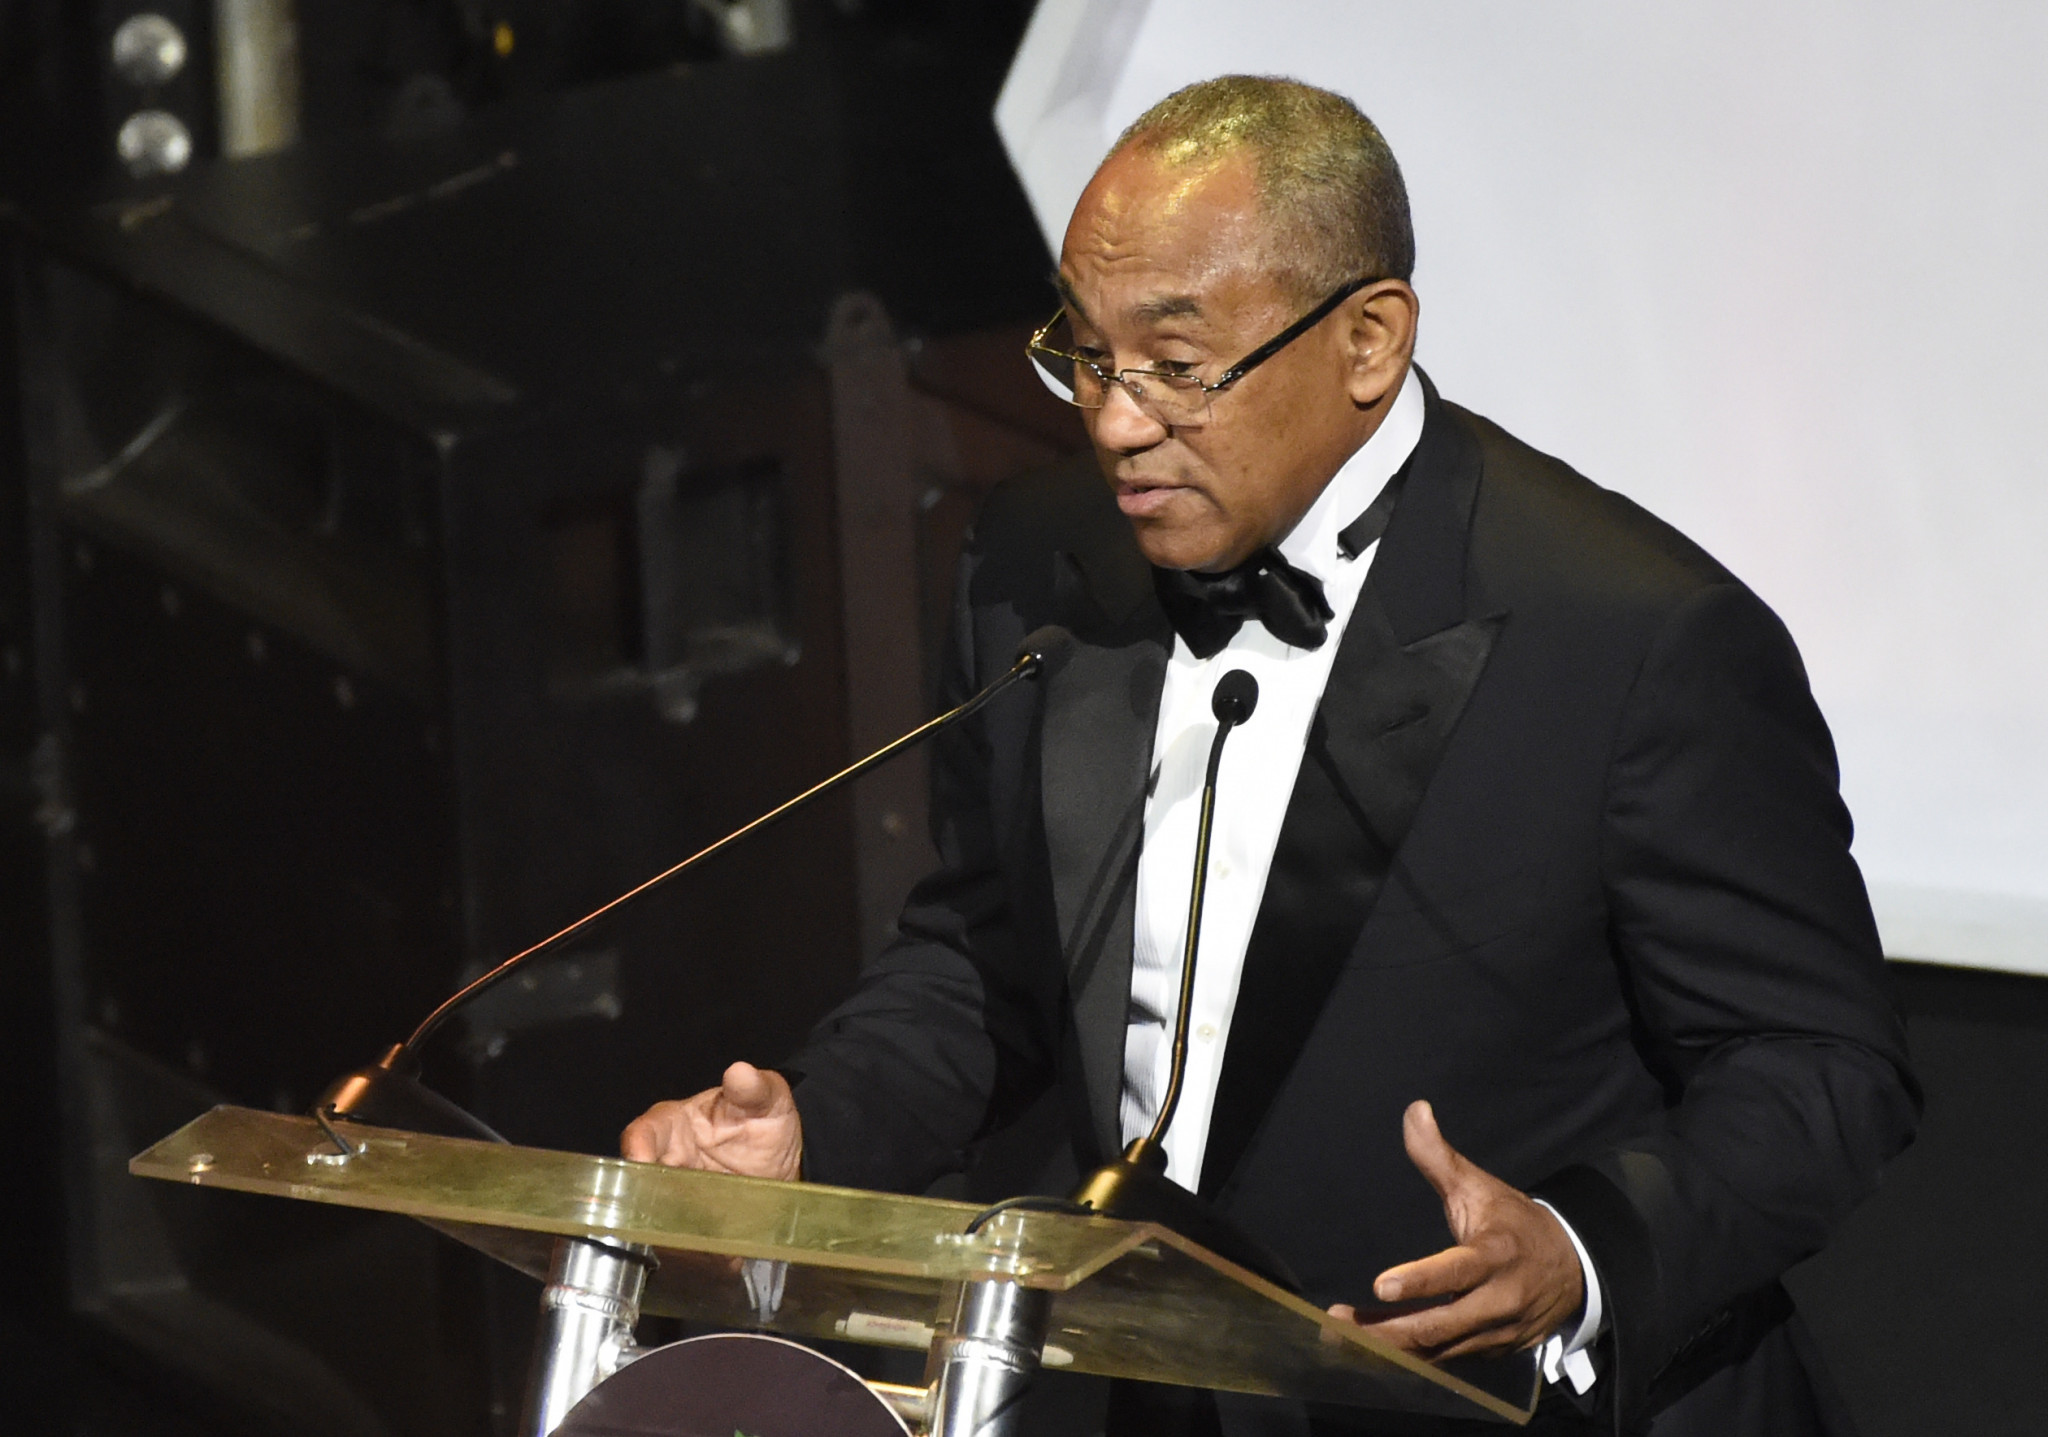 CAF President Ahmad has reiterated his support for Morocco hosting the 2026 World Cup ©Getty Images